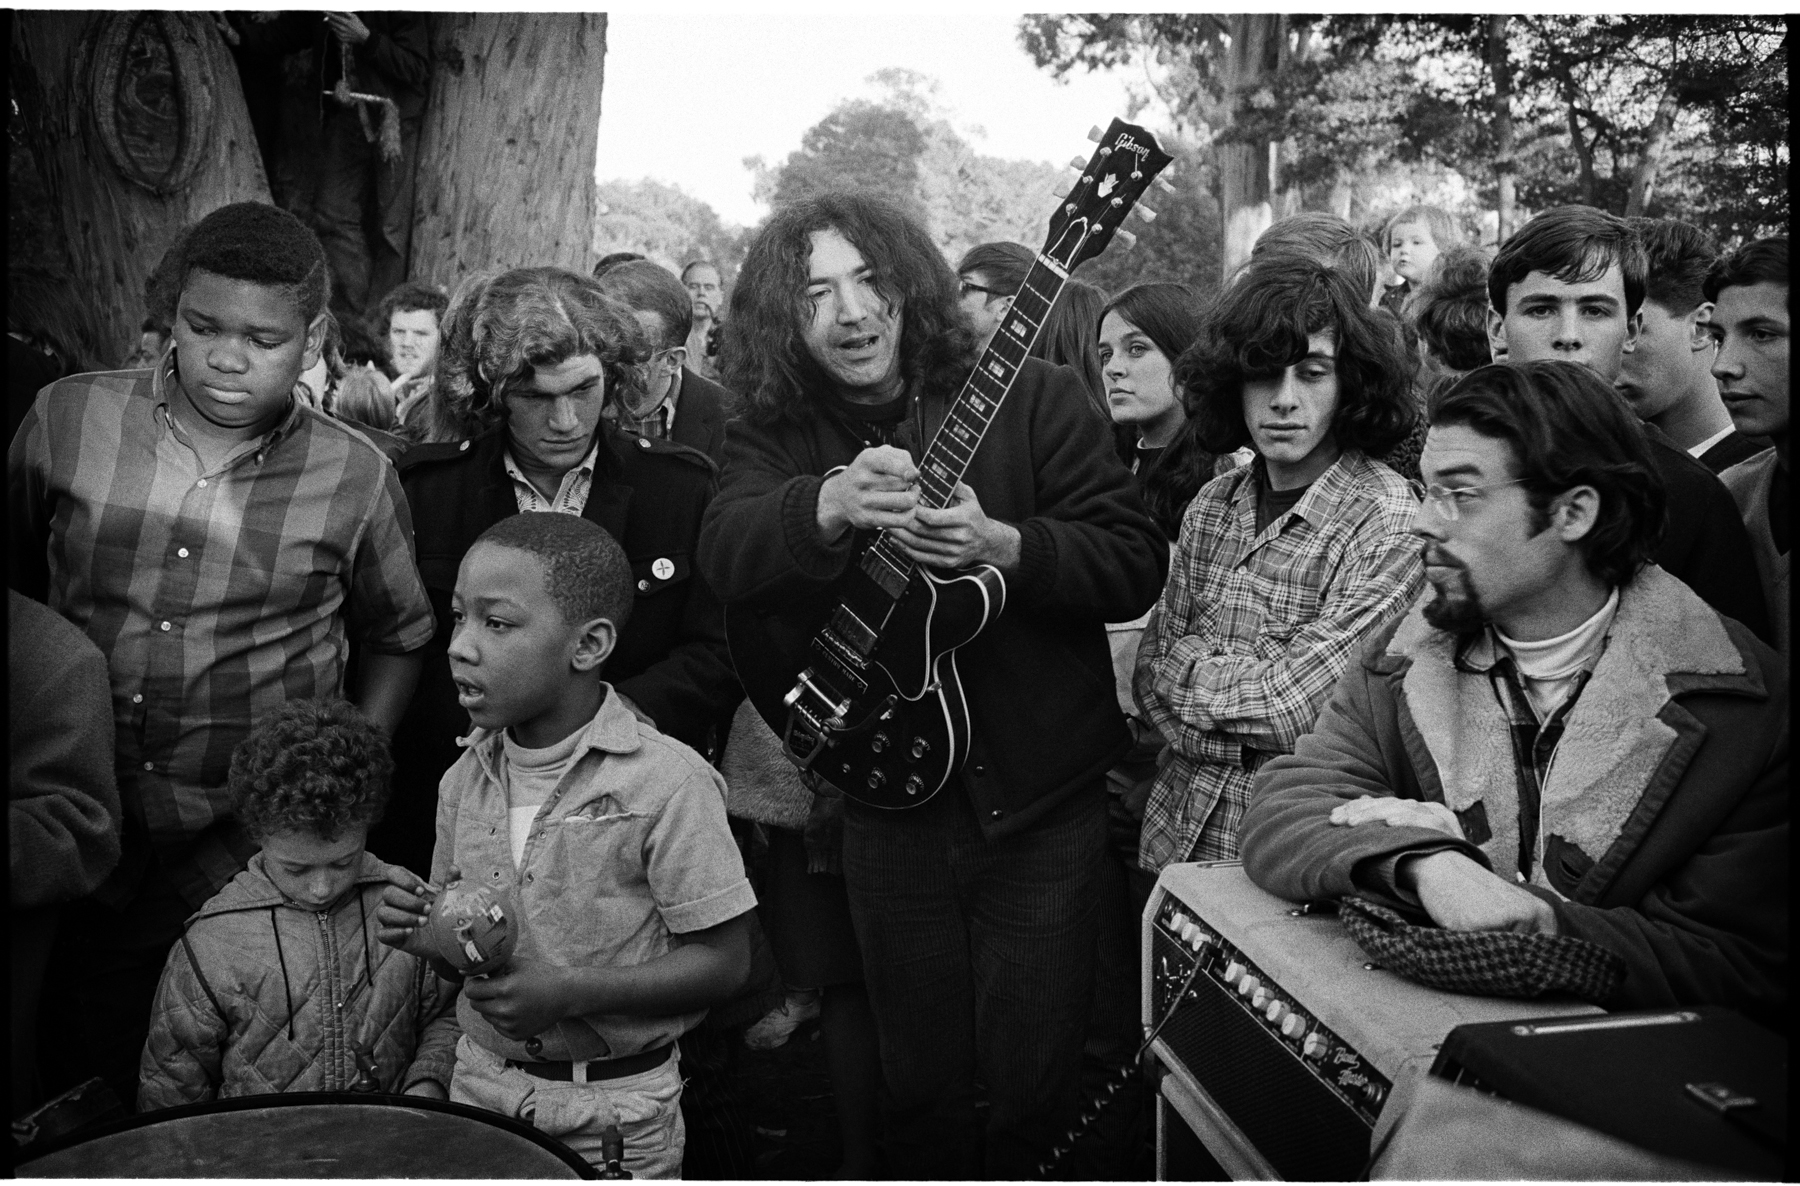 Jerry Garcia in the Golden Gate Park